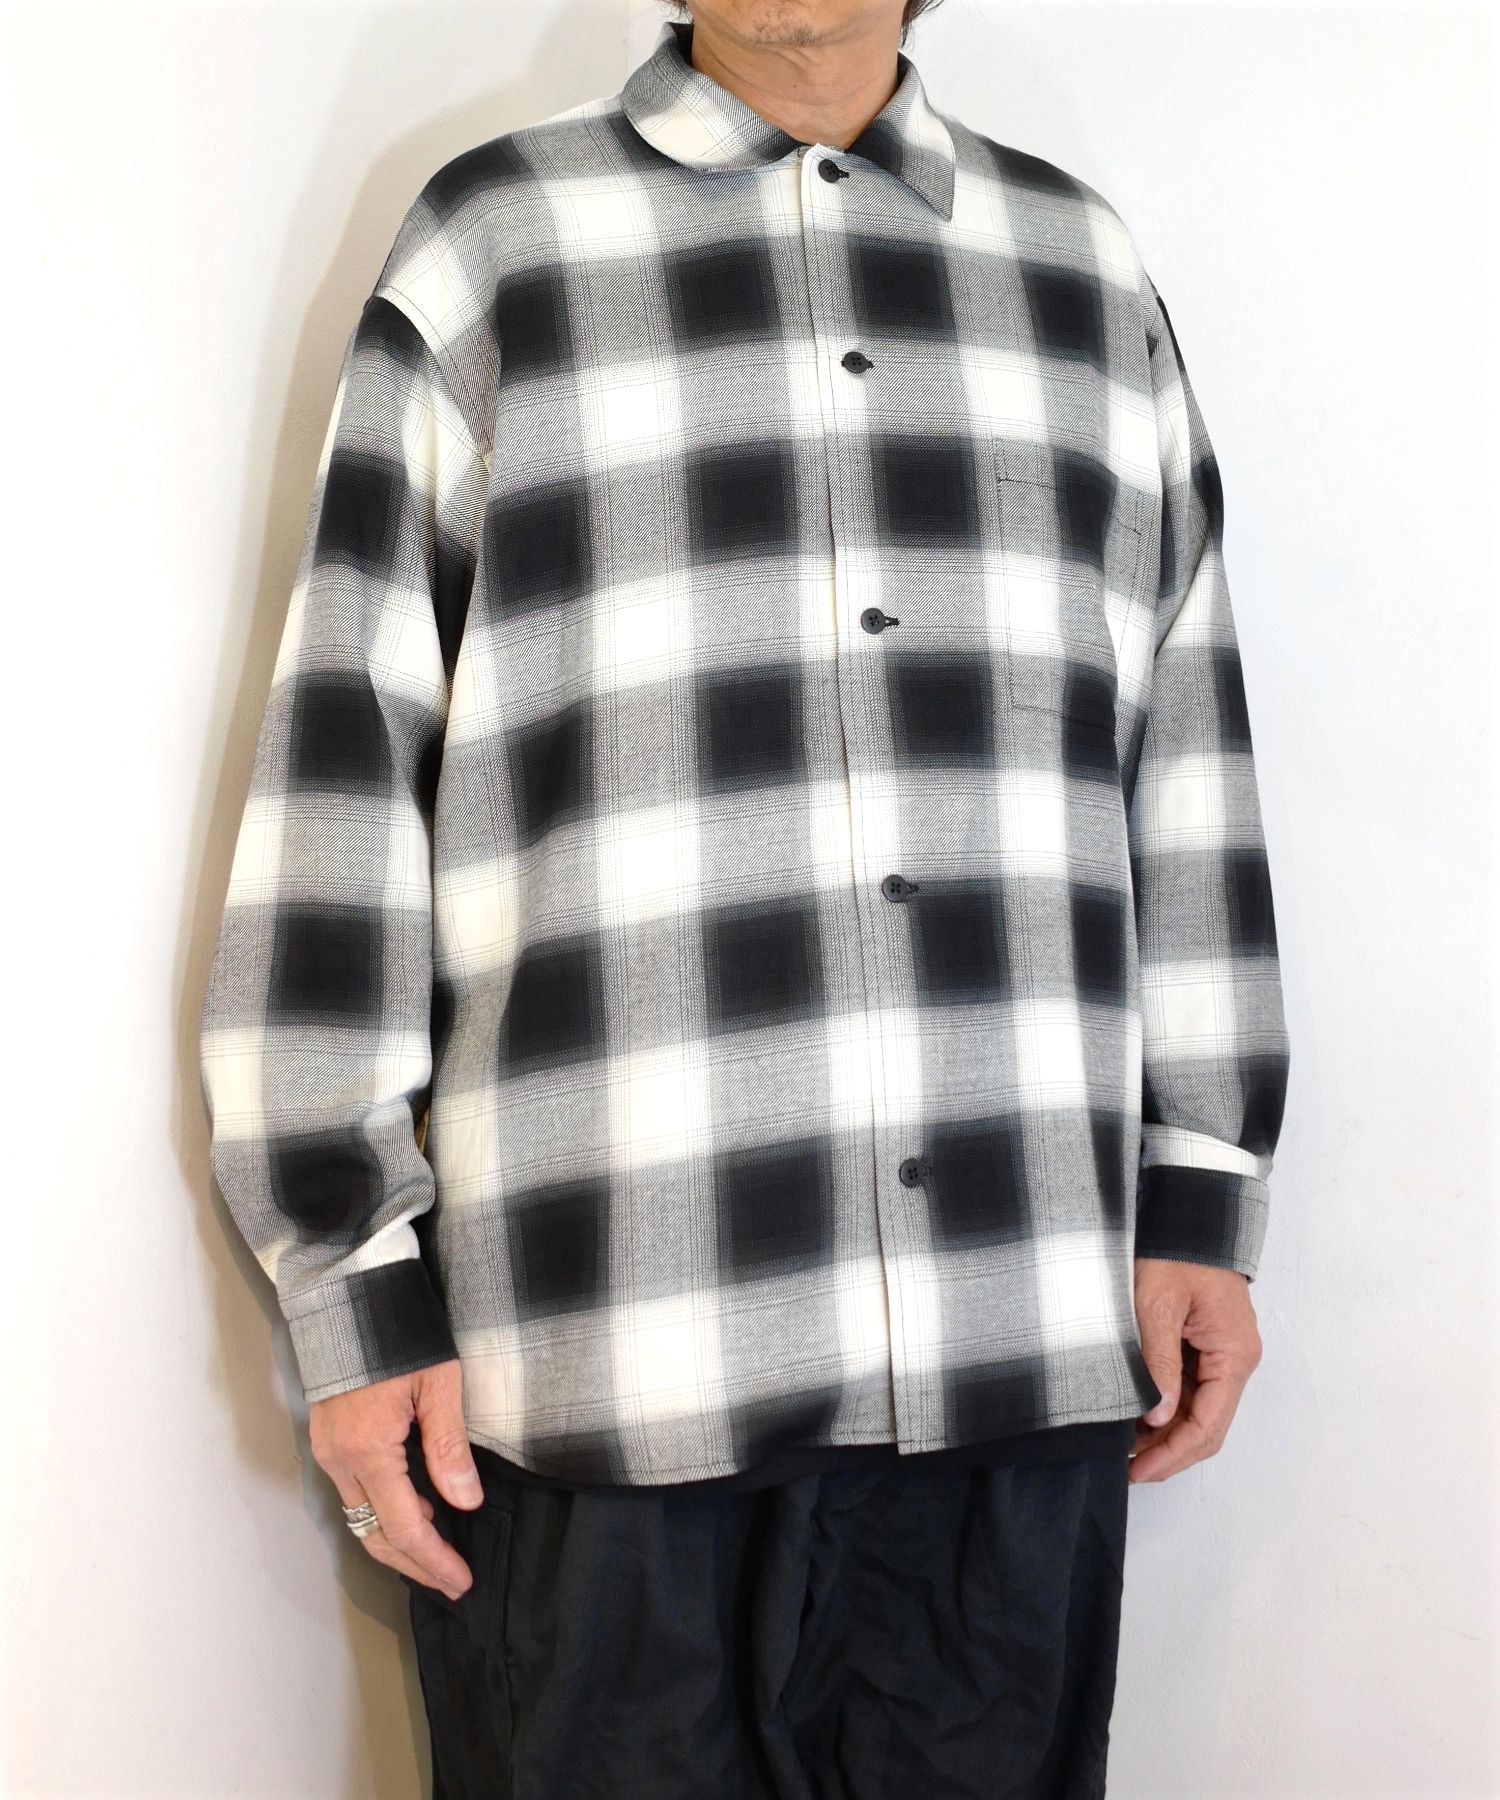 ROTTWEILER - 【ラスト1点】R9 OMBRE L/S SHIRT (WHITE) / オンブレ 